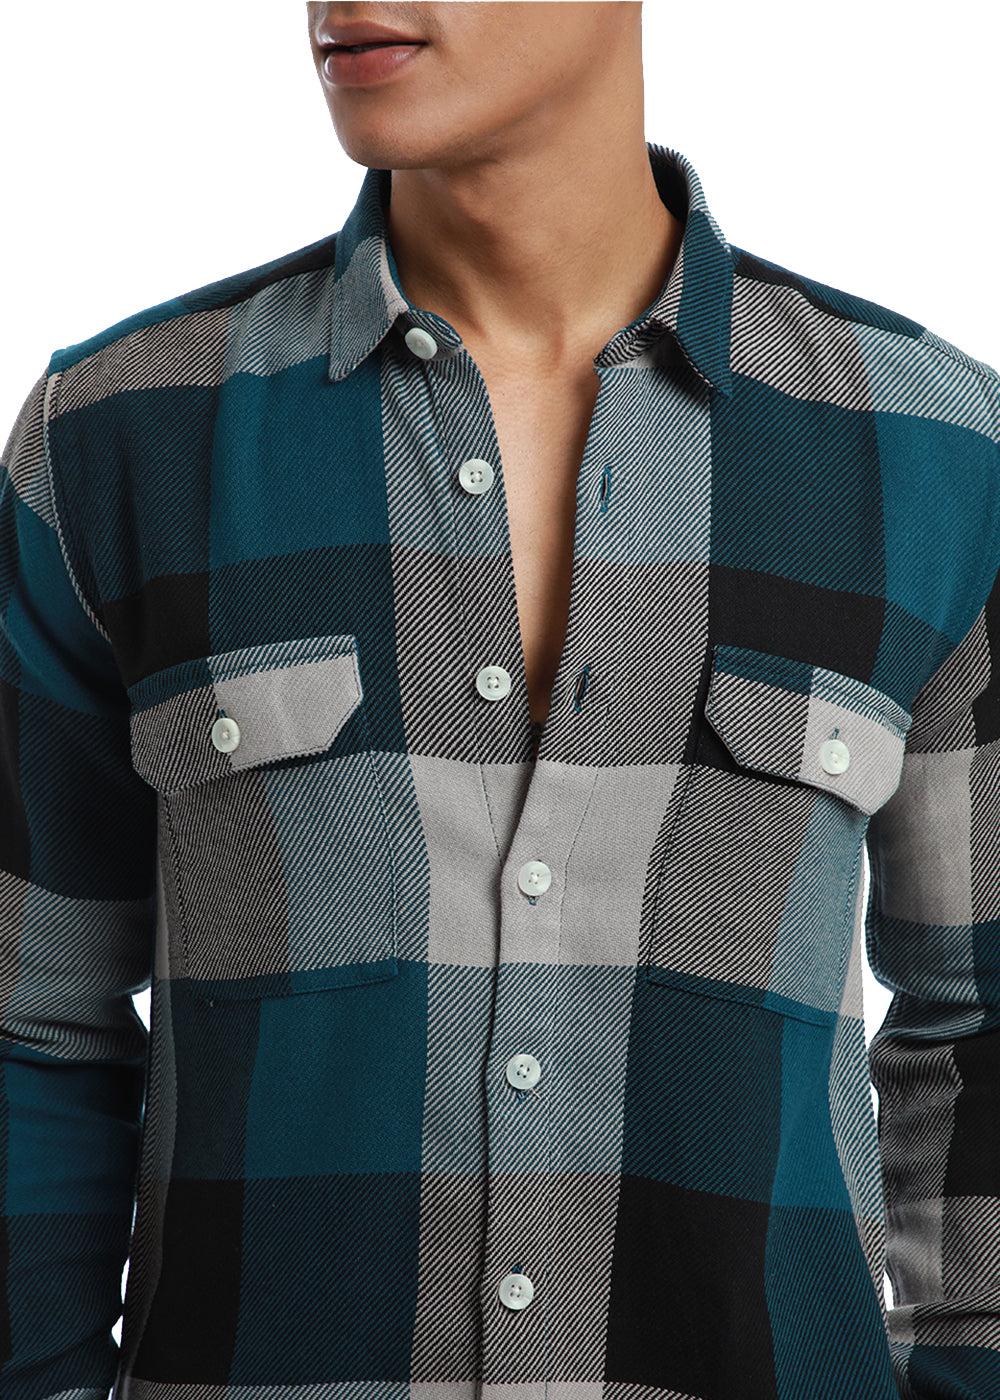 Teal Blue Brushed Cotton Check Shirt 3